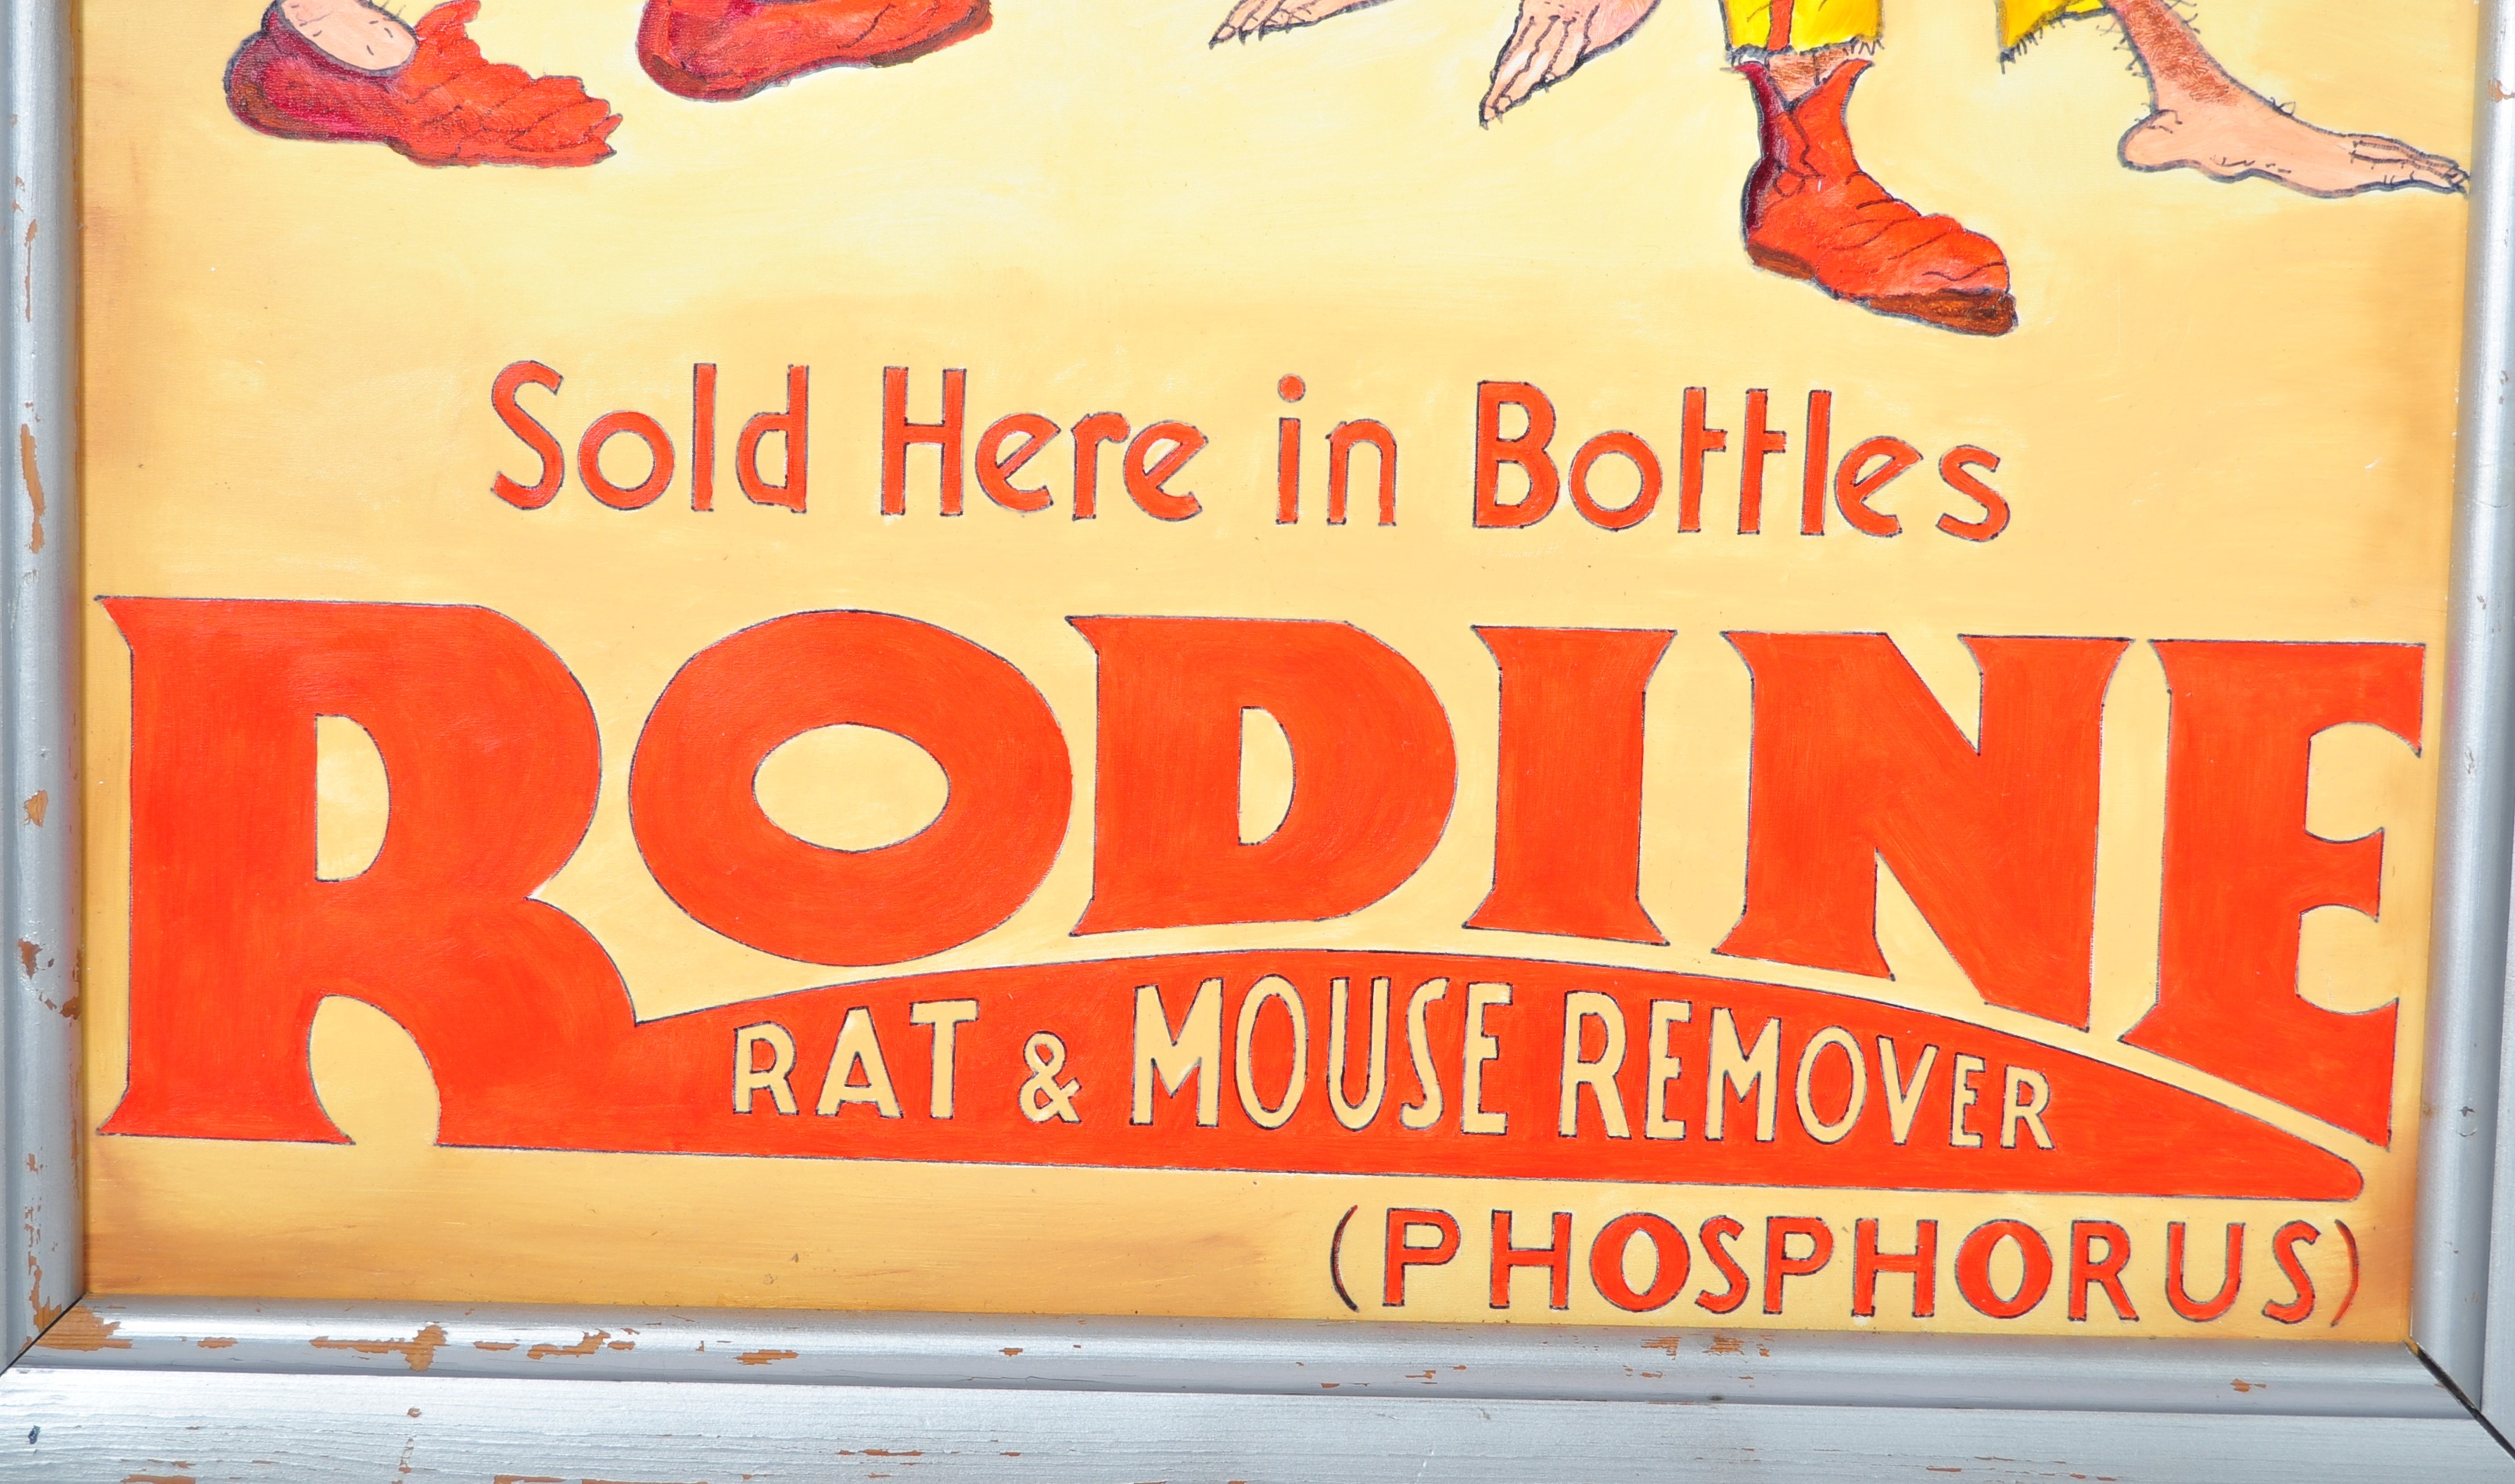 RODINE RAT AND MOUSE REMOVER OIL ON BOARD IMPRESSI - Image 3 of 3